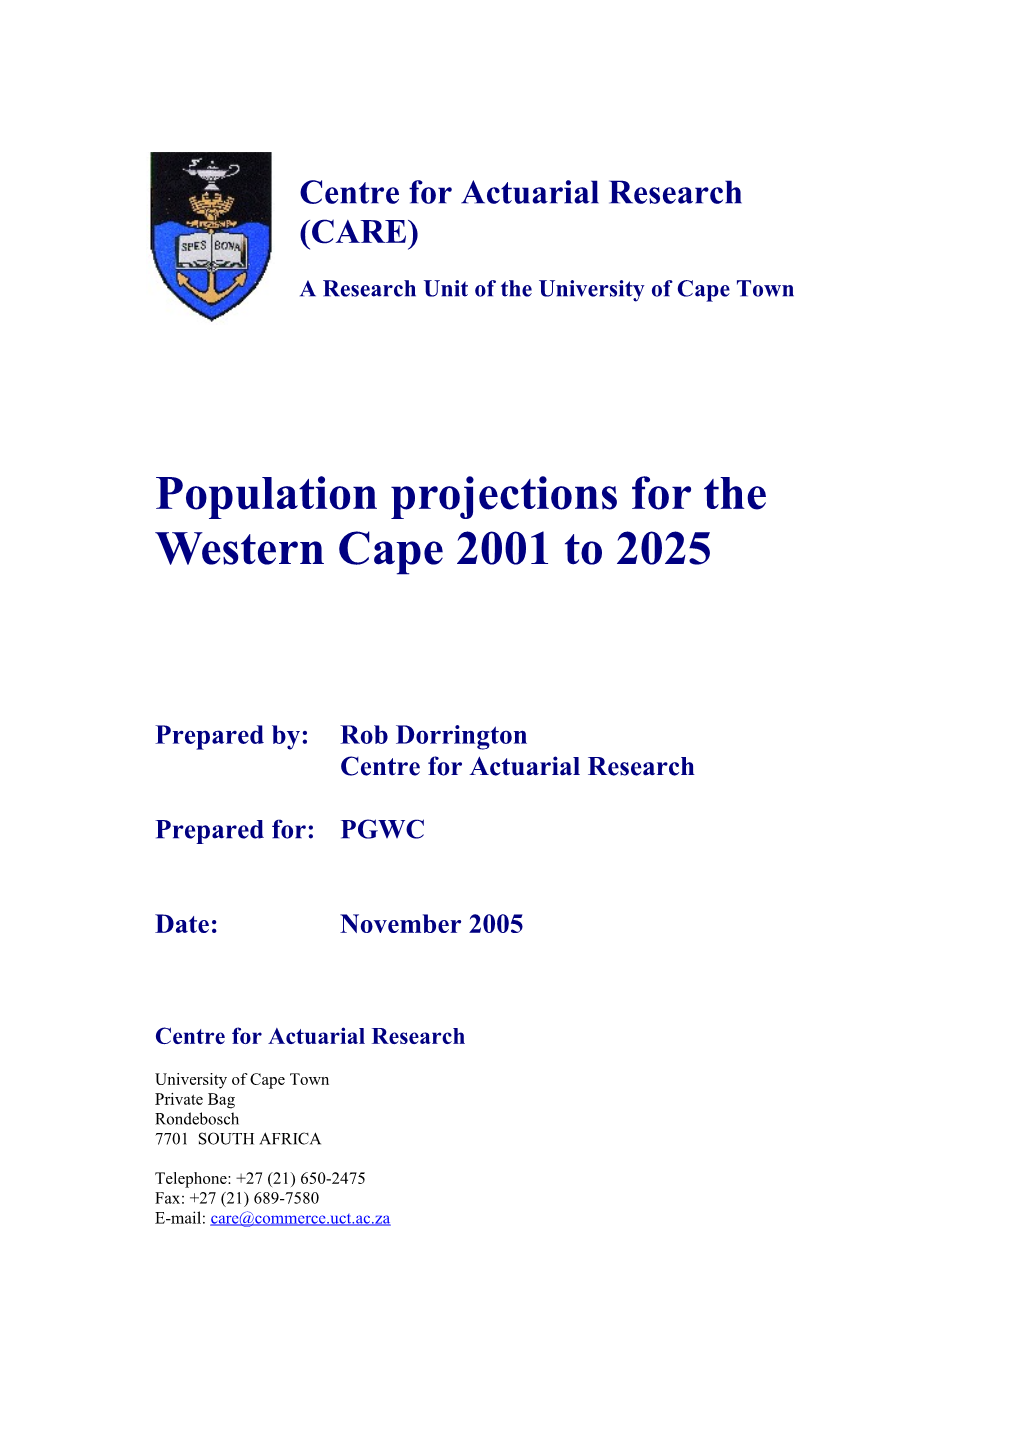 A Research Unit of the University of Cape Town